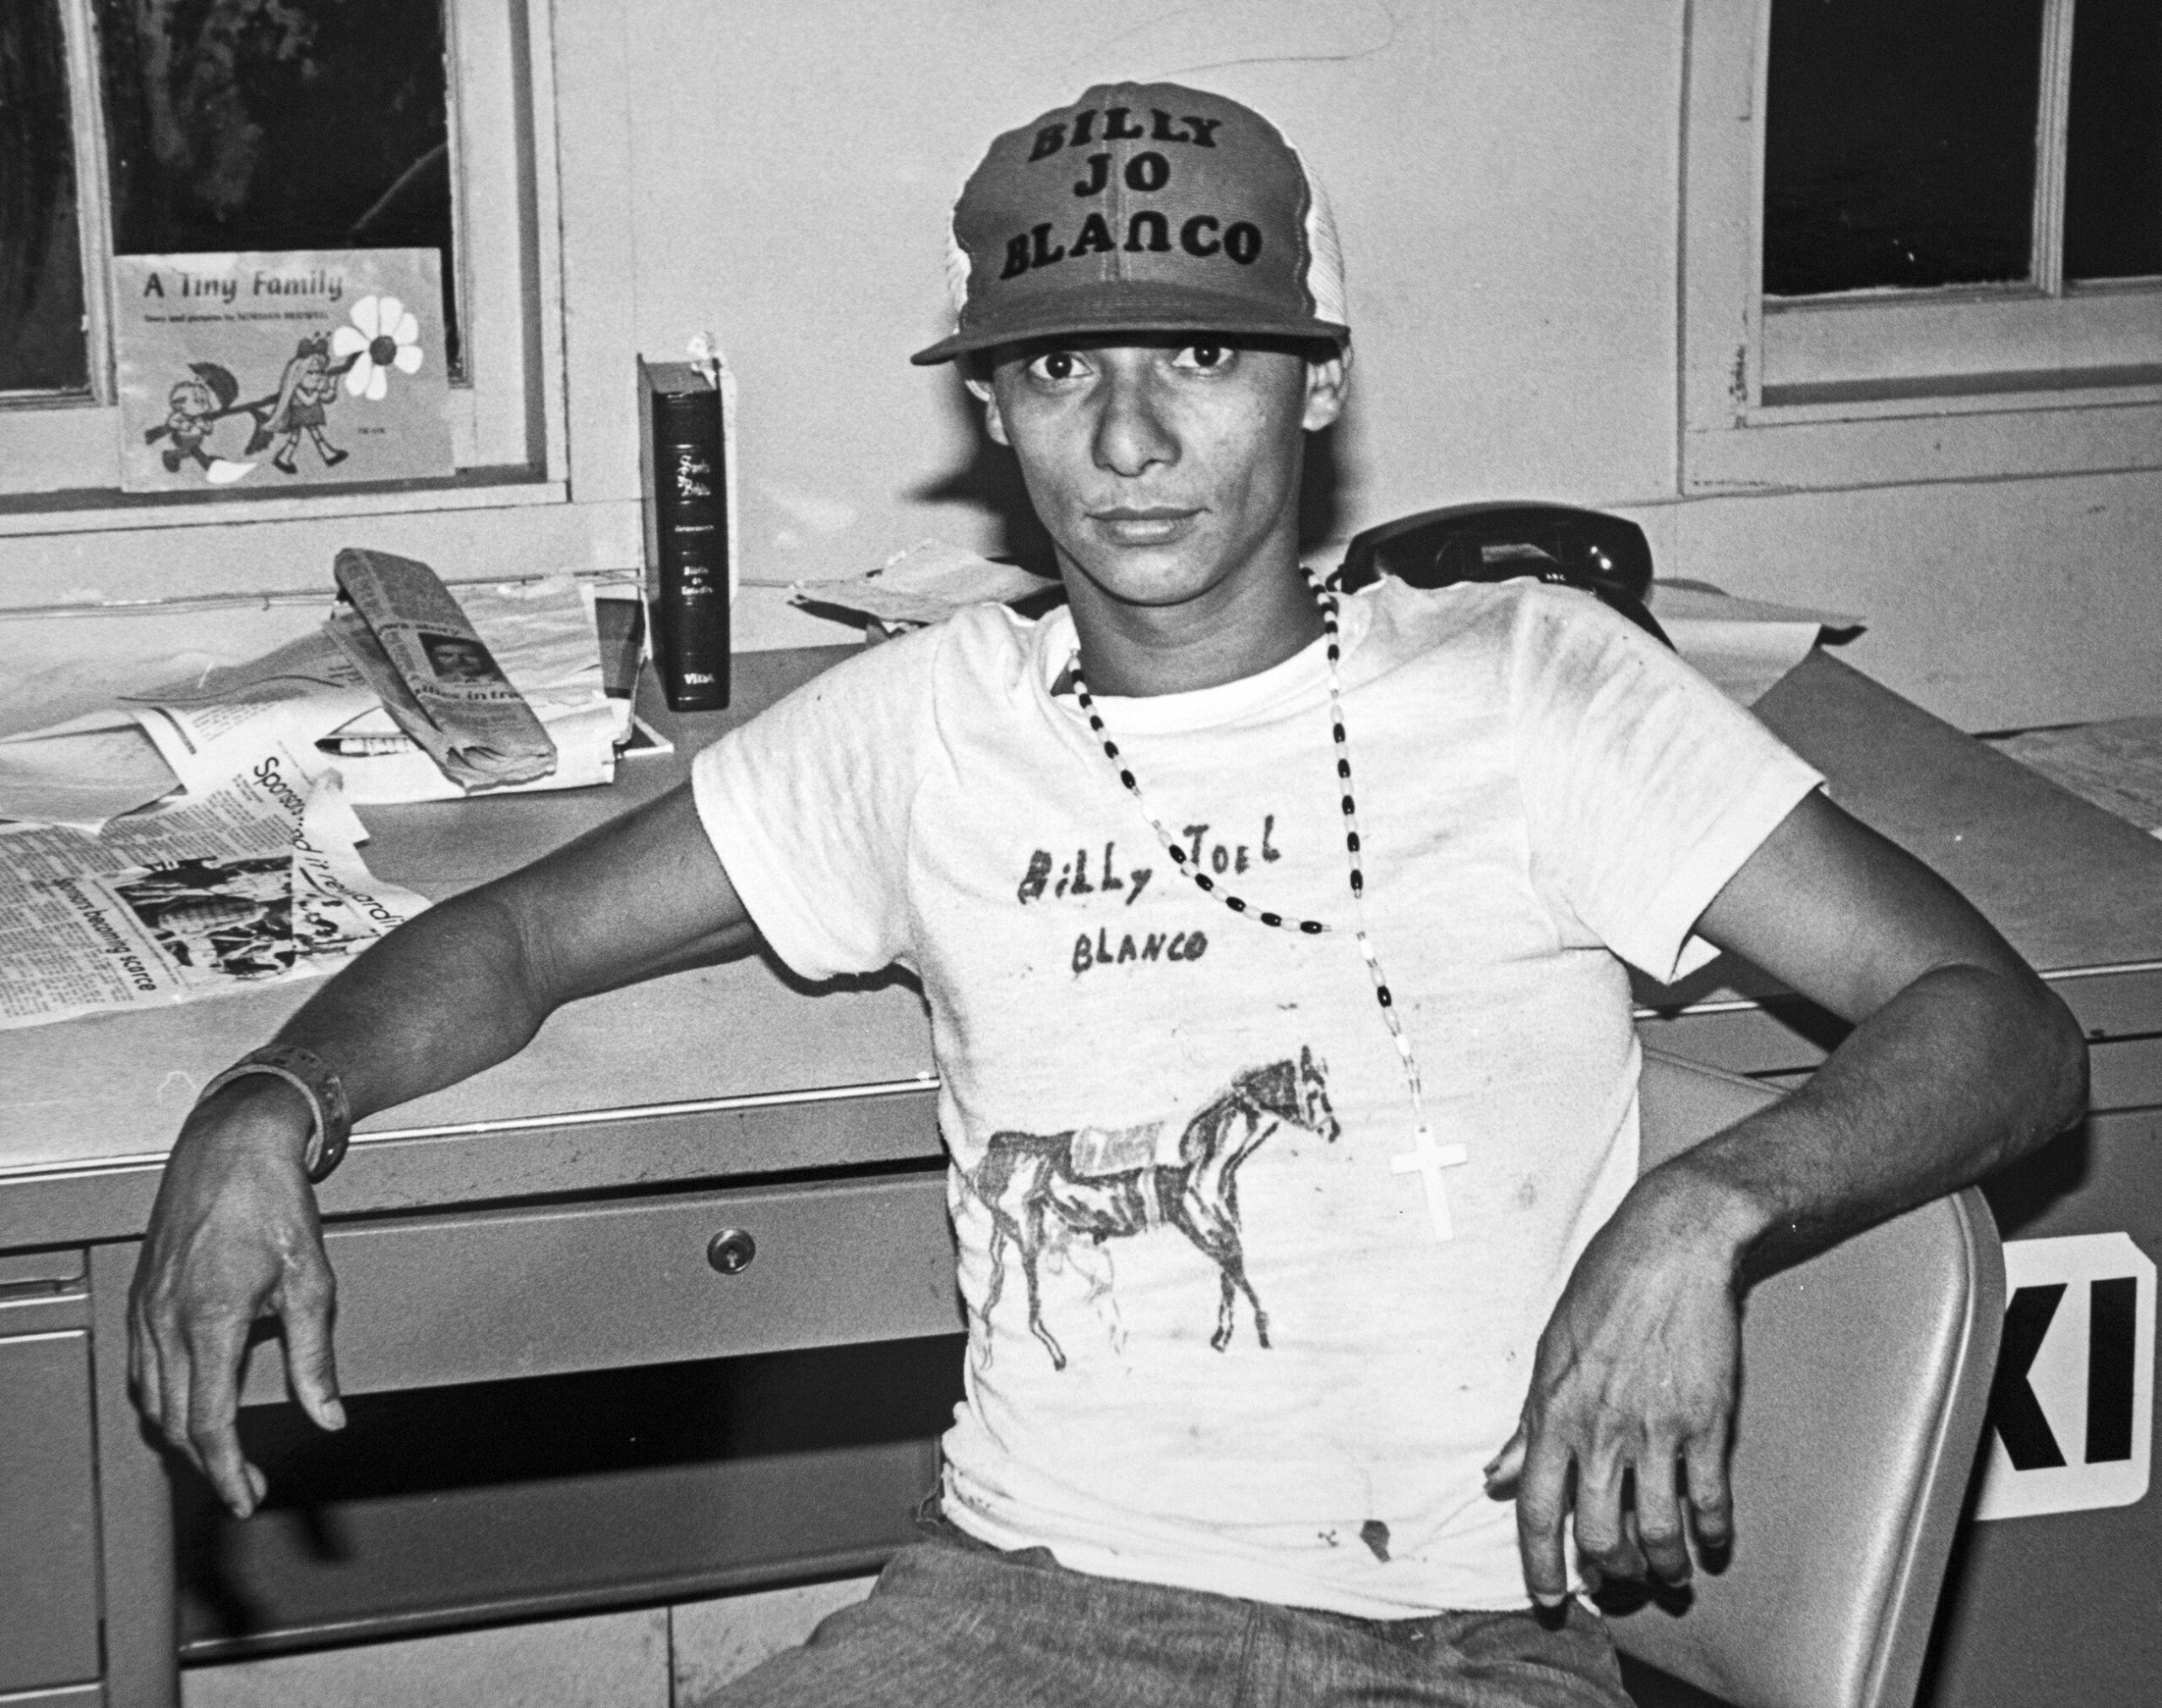 Luis Naranjo Soca, alias, Billy Joel Blaco, poses in a hand-painted shirt and a hat